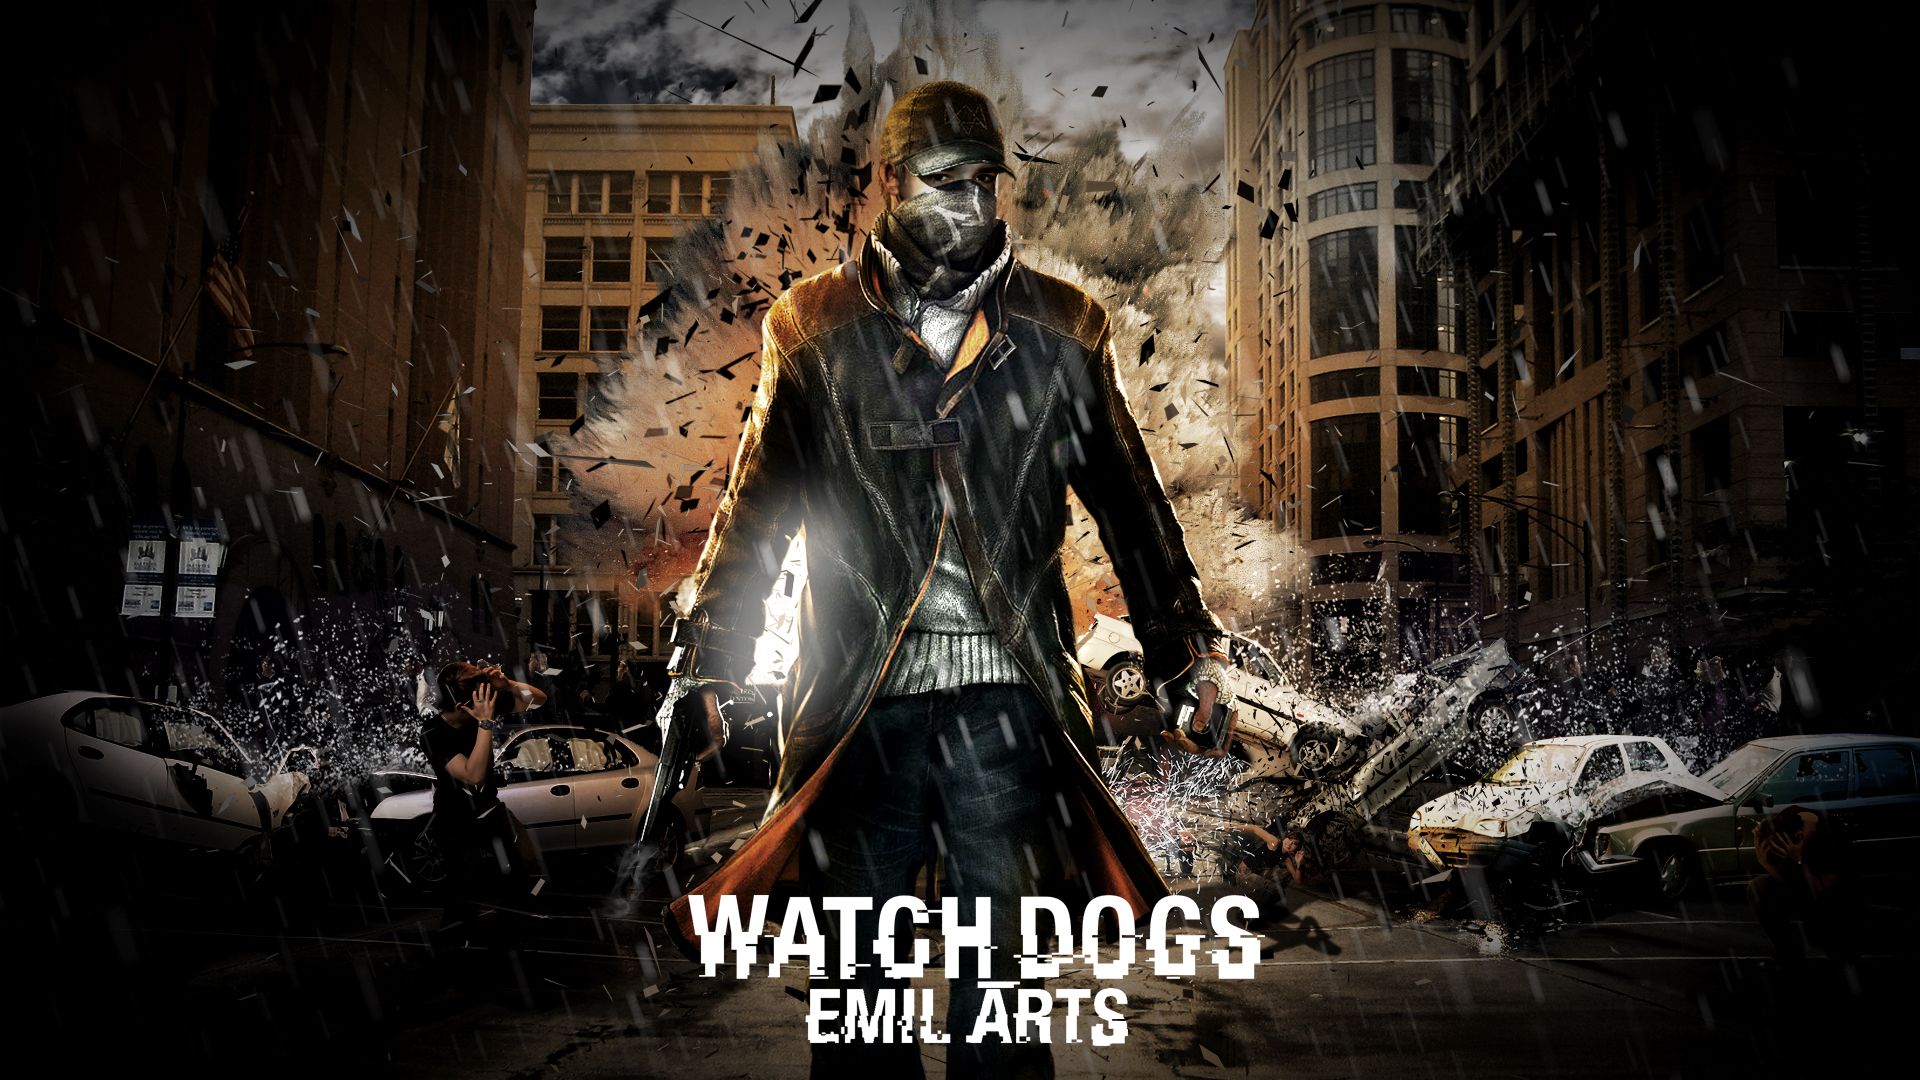 Watch Dogs Background. Overwatch Wallpaper Epic, Watch Wallpaper and Overwatch Wallpaper PC